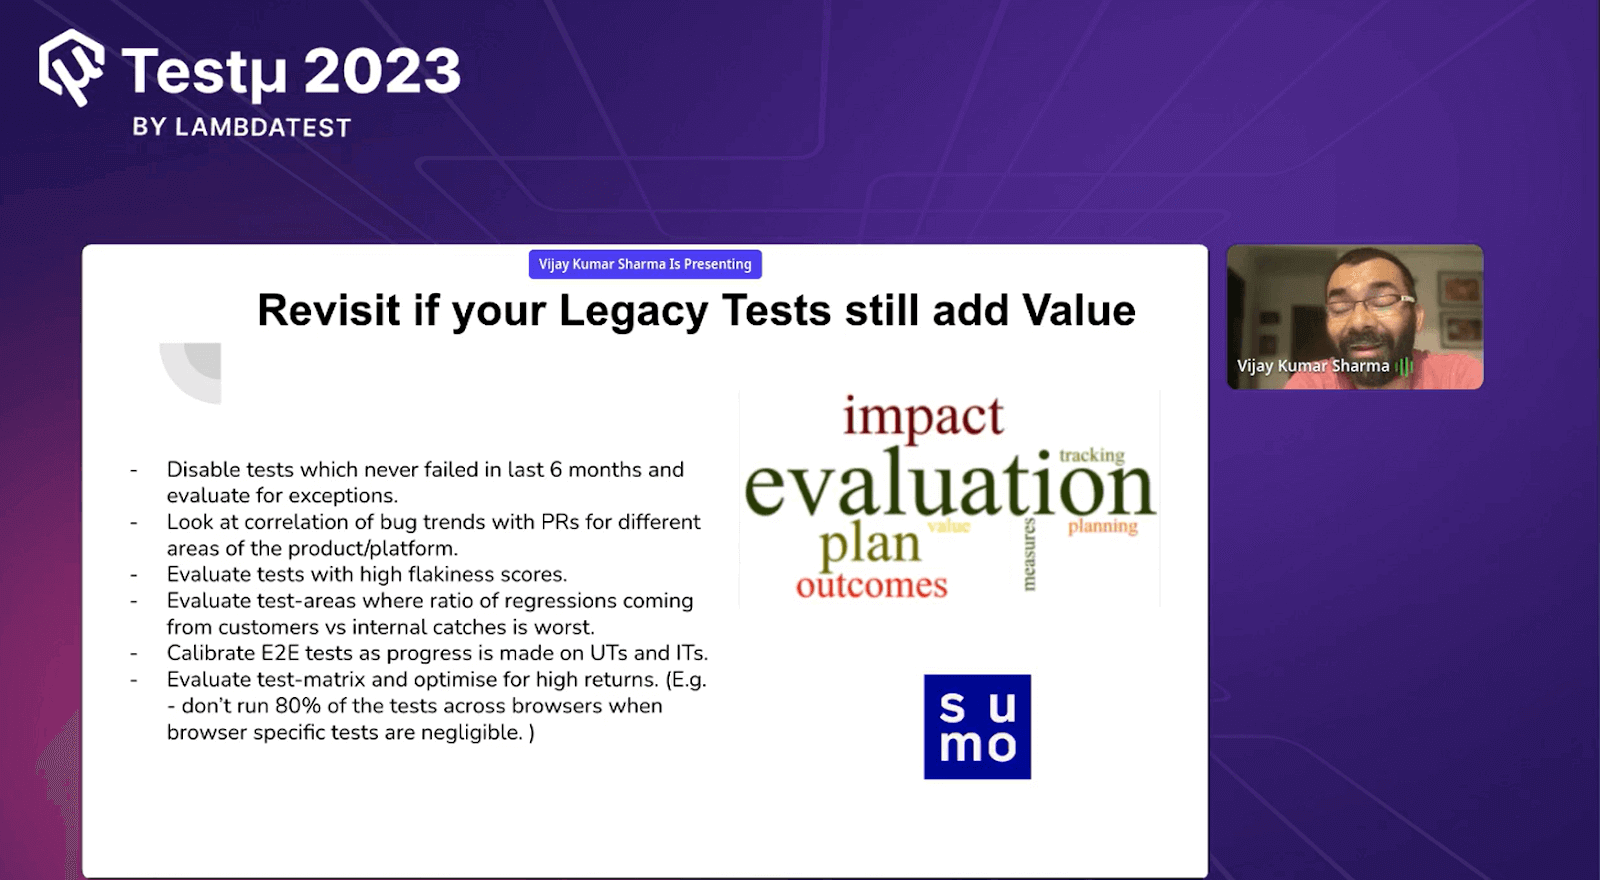 Revisit if your legacy tests still add value